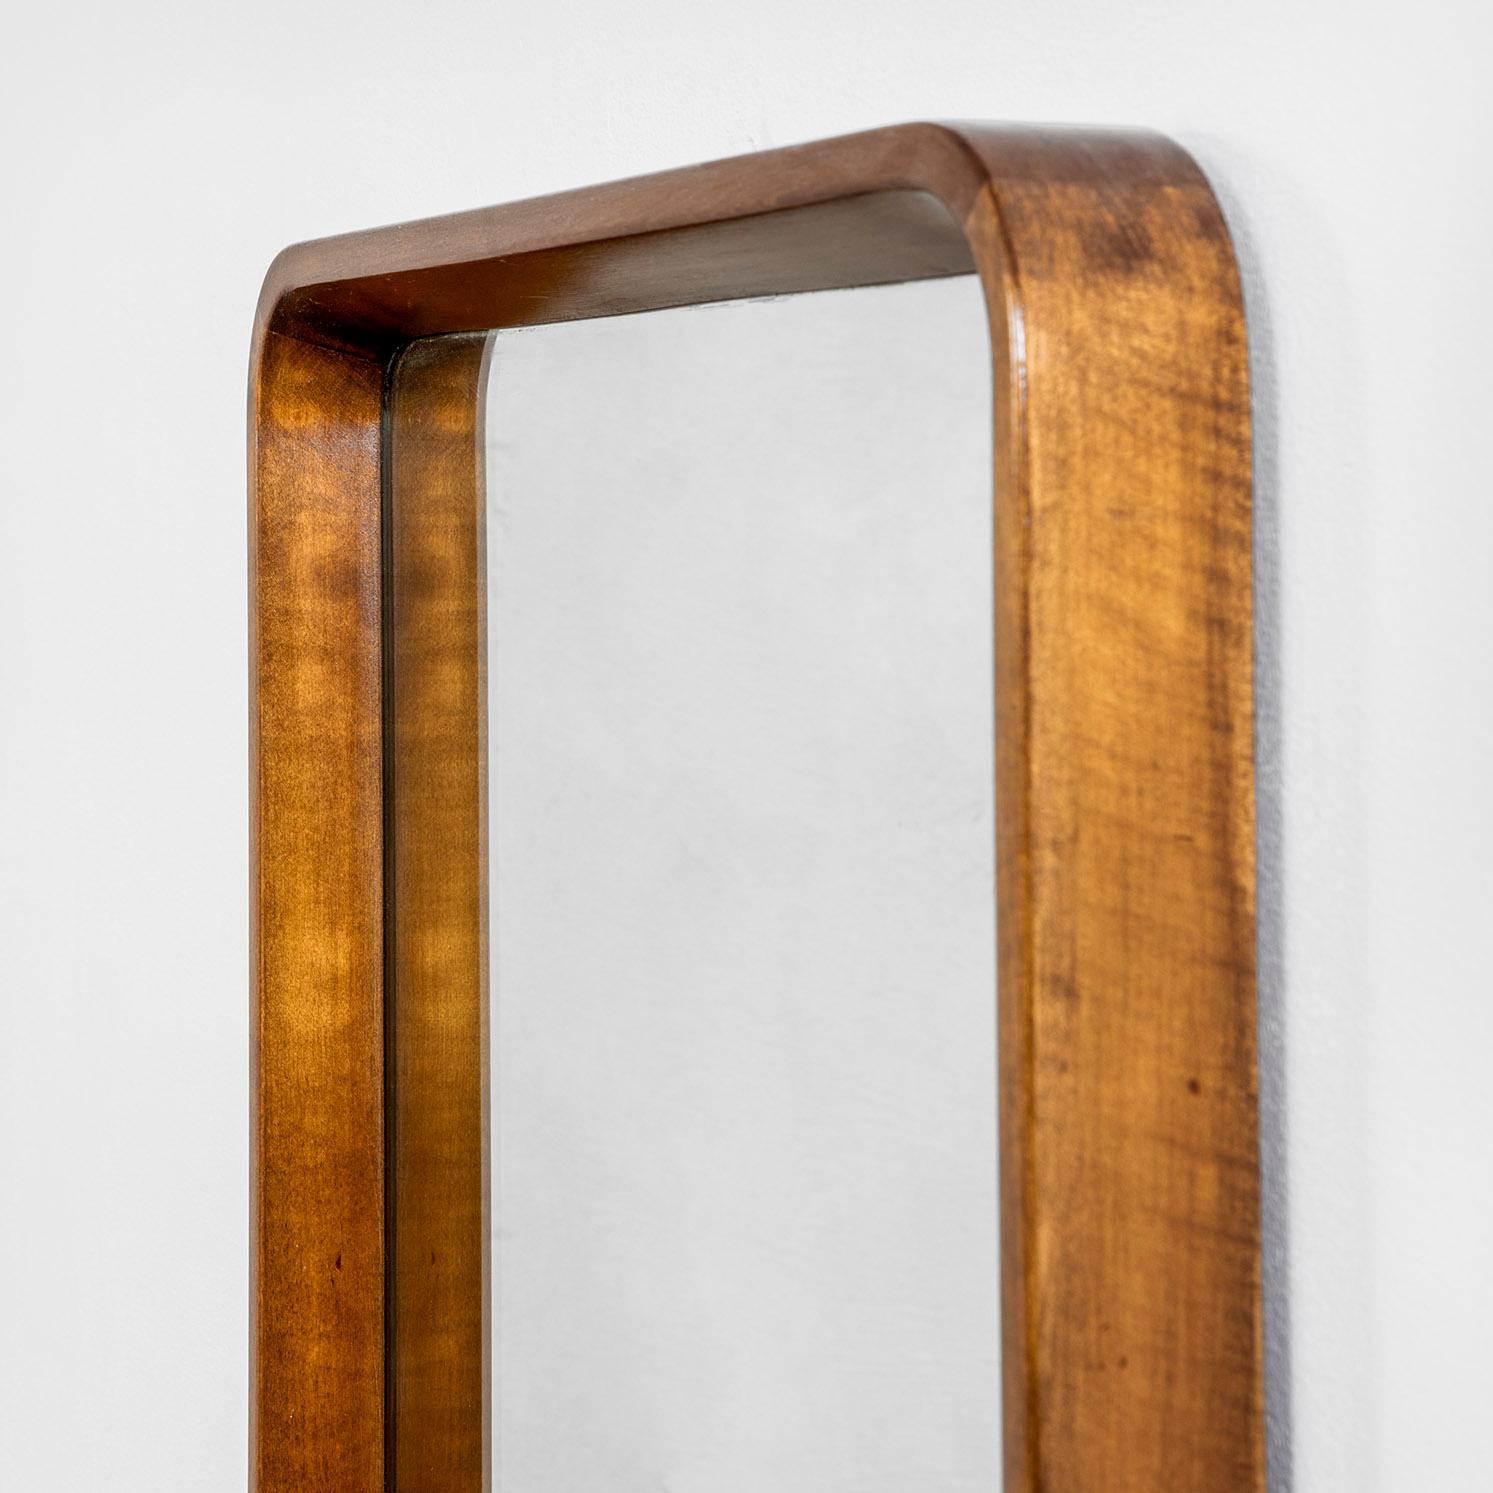 Pair of wall mirror designed by Gustavo Pulitzer and projected for First-class Rooms of the Motorboat Augustus in '50s. 
Produced by Cantieri Navali San Marco, Trieste.
The frame of each mirror is in Wood.
Good condition.